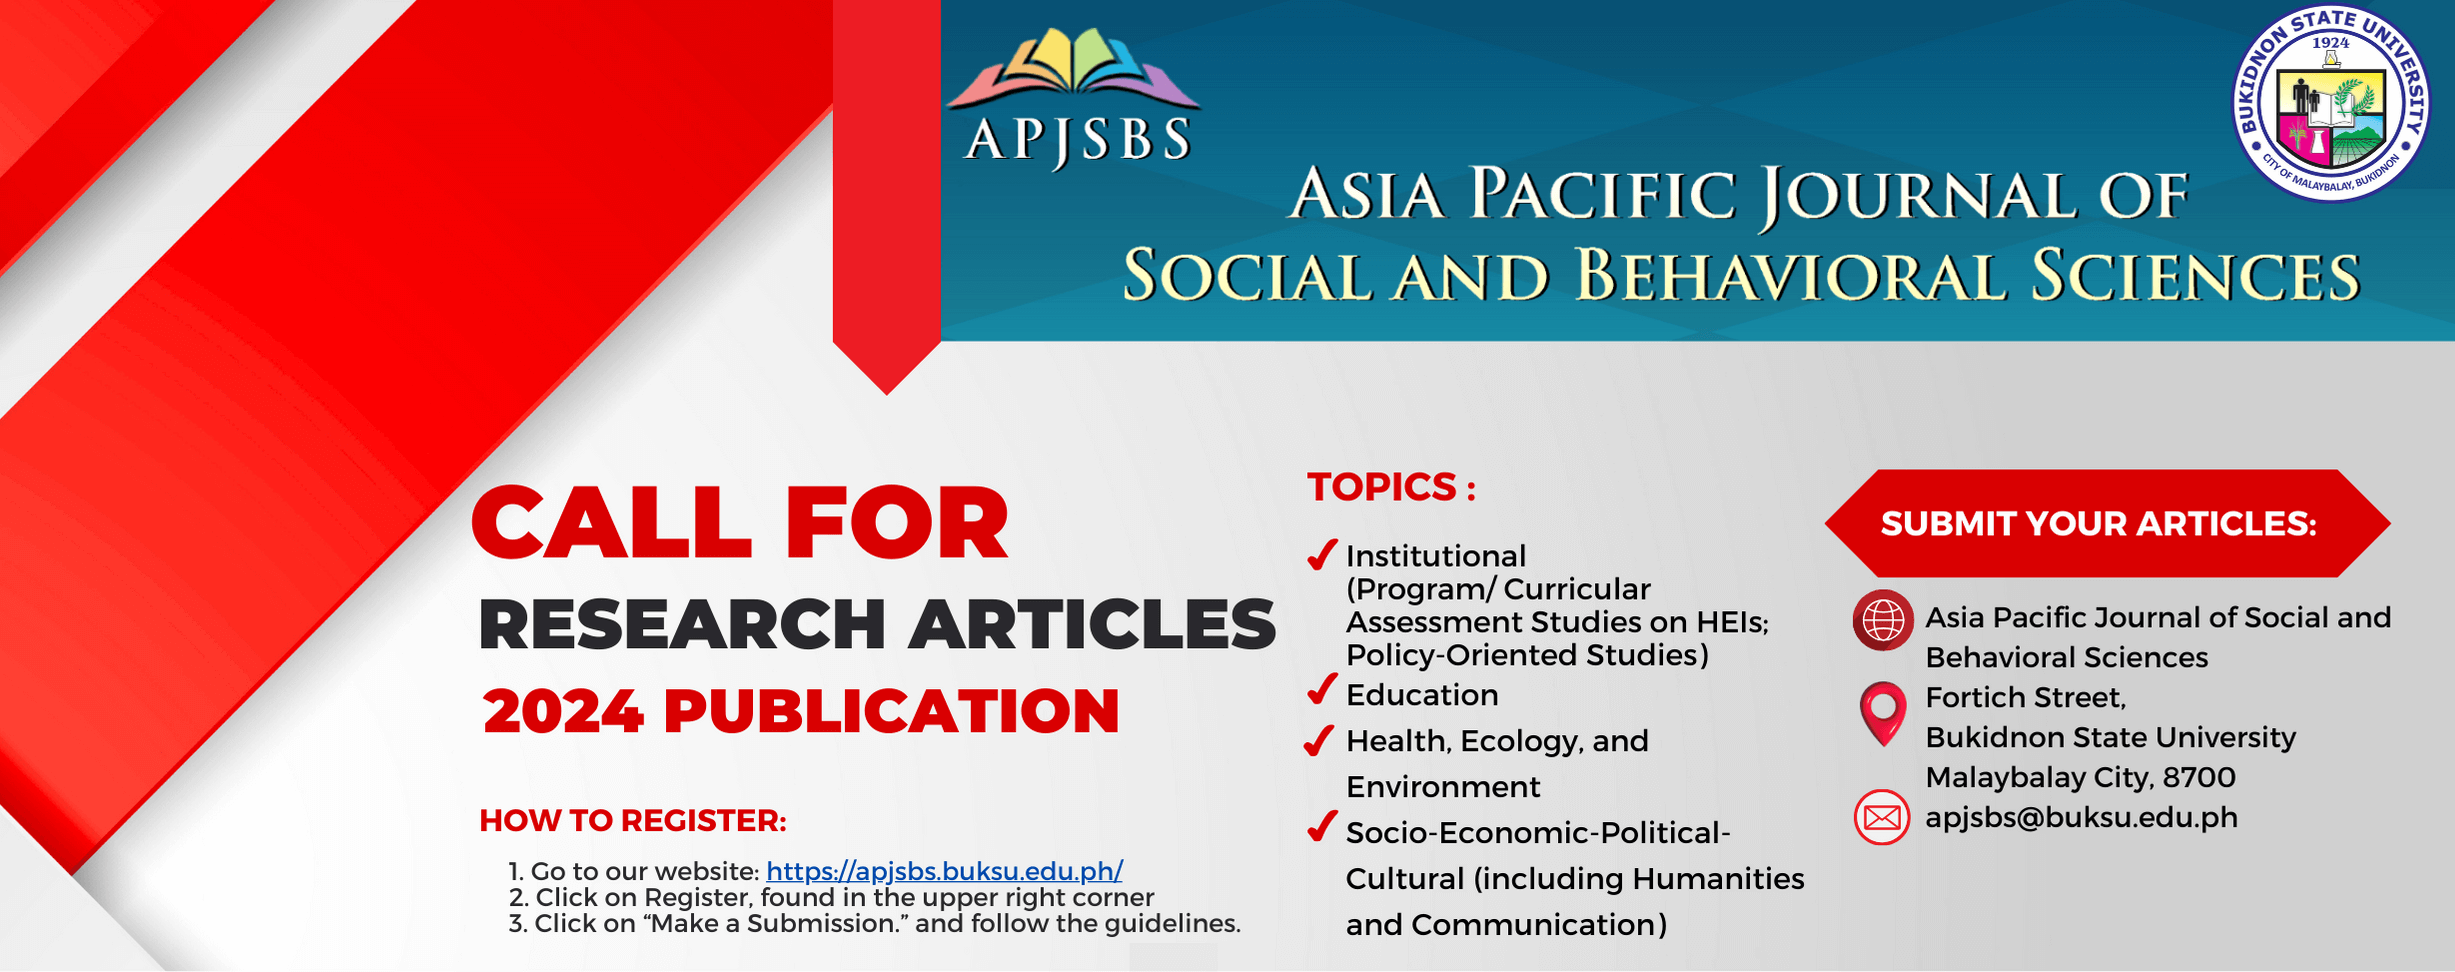 Call for research articles for APJSBS